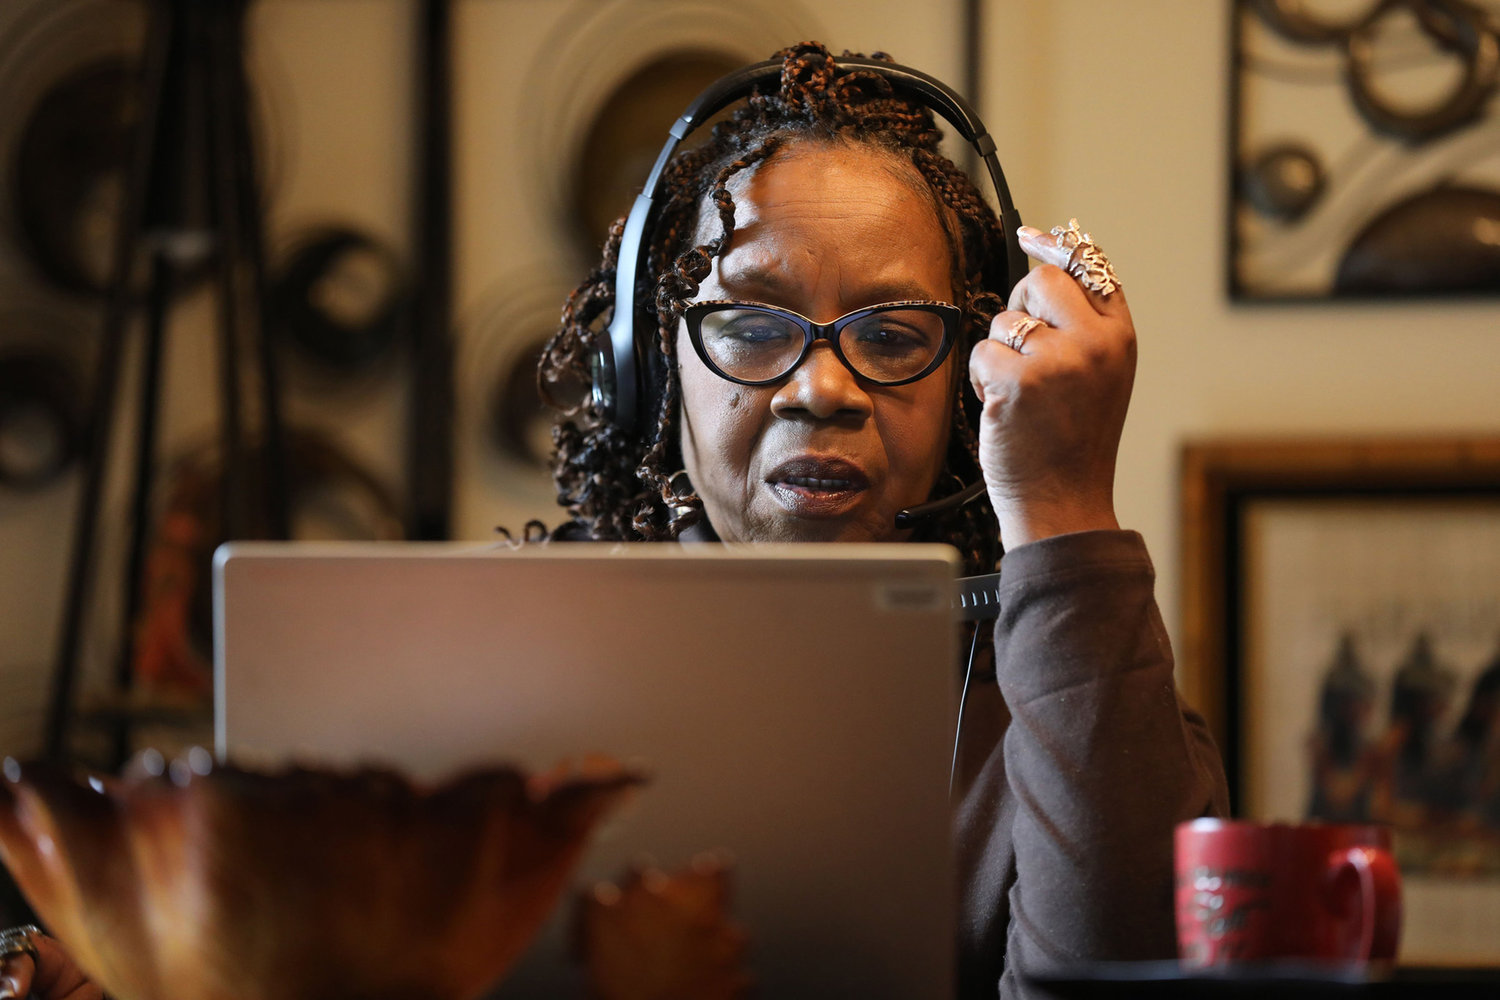 Contact tracer Cherie Hunter puts on her headset and sets up her laptop as she prepares to make phone calls from her home in Tinley Park, Illinois, on Thursday, Nov. 4, 2021, to people who have tested positive for COVID-19. (Antonio Perez/Chicago Tribune/TNS)